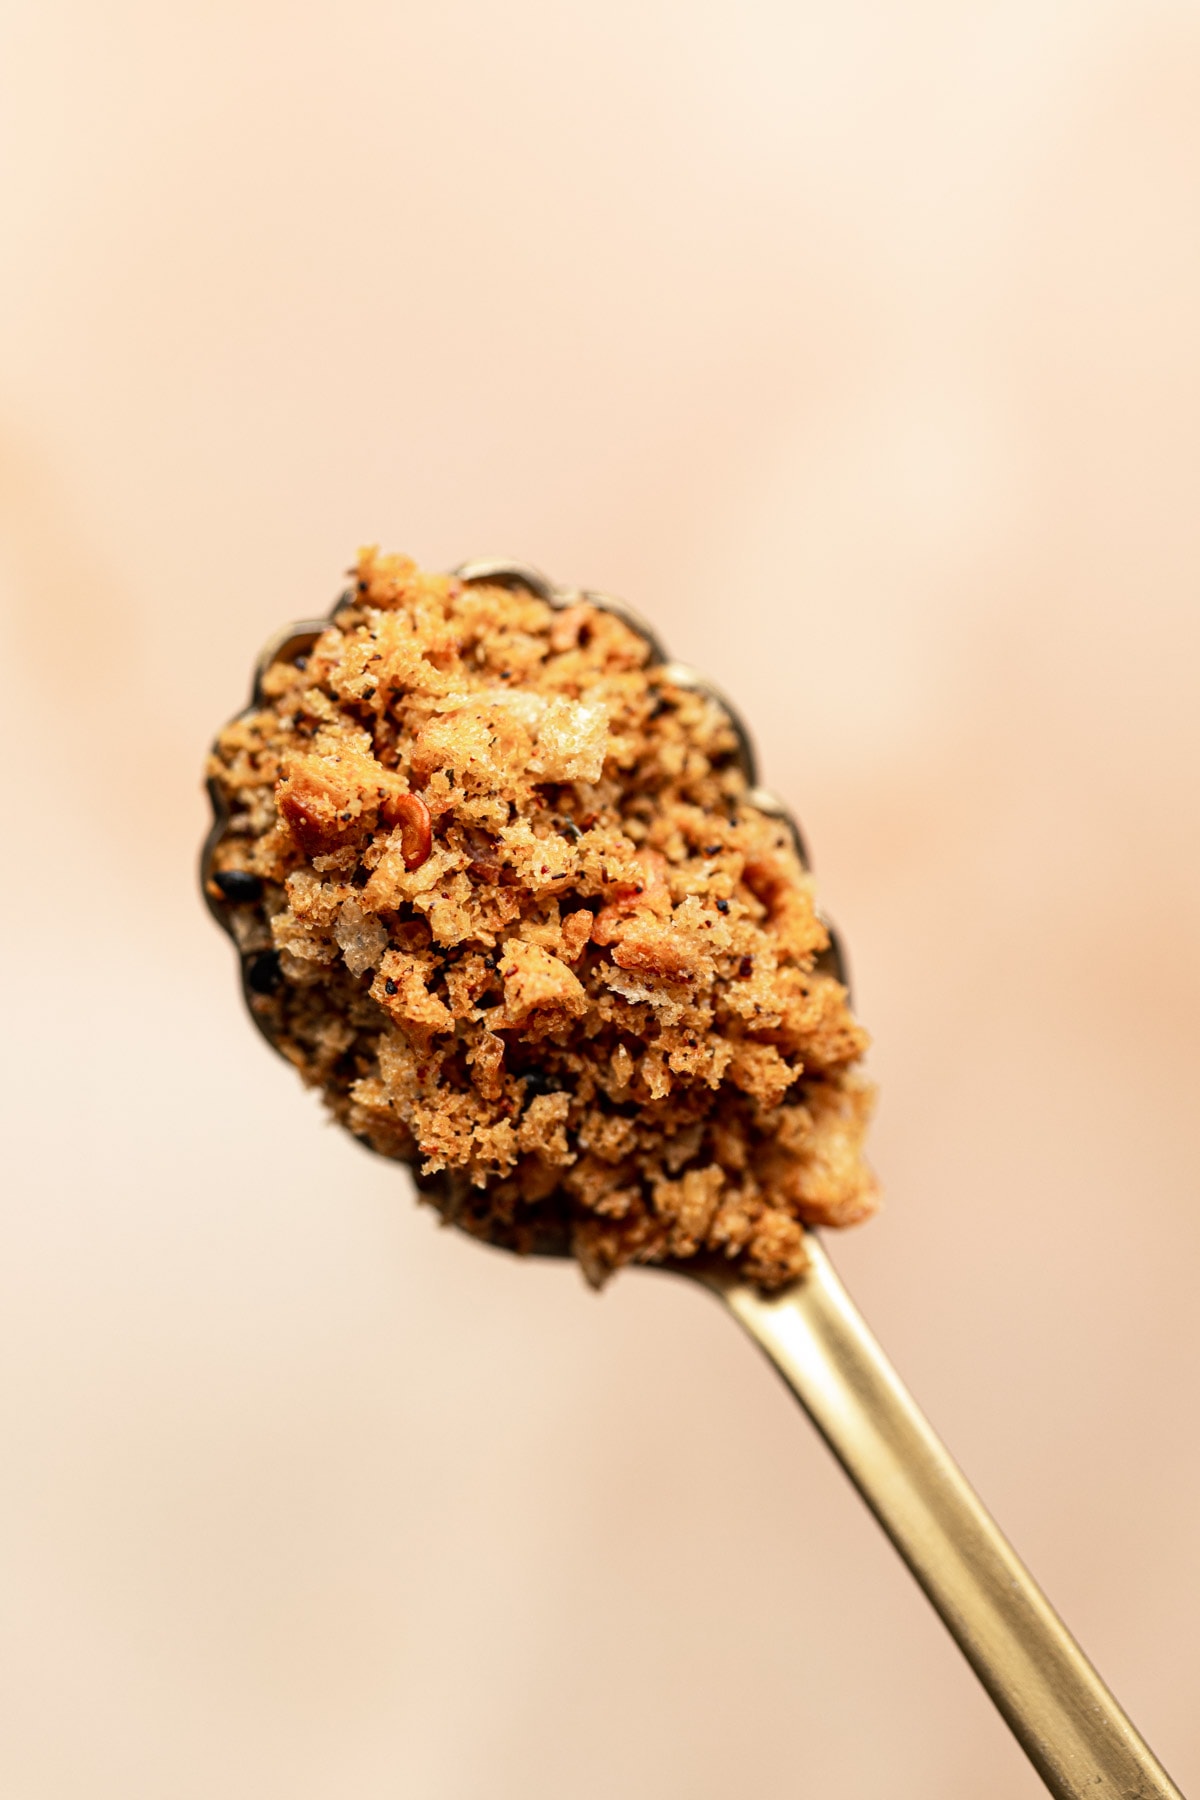 A gold spoon filled with breadcrumbs viewed from a close-up angle.